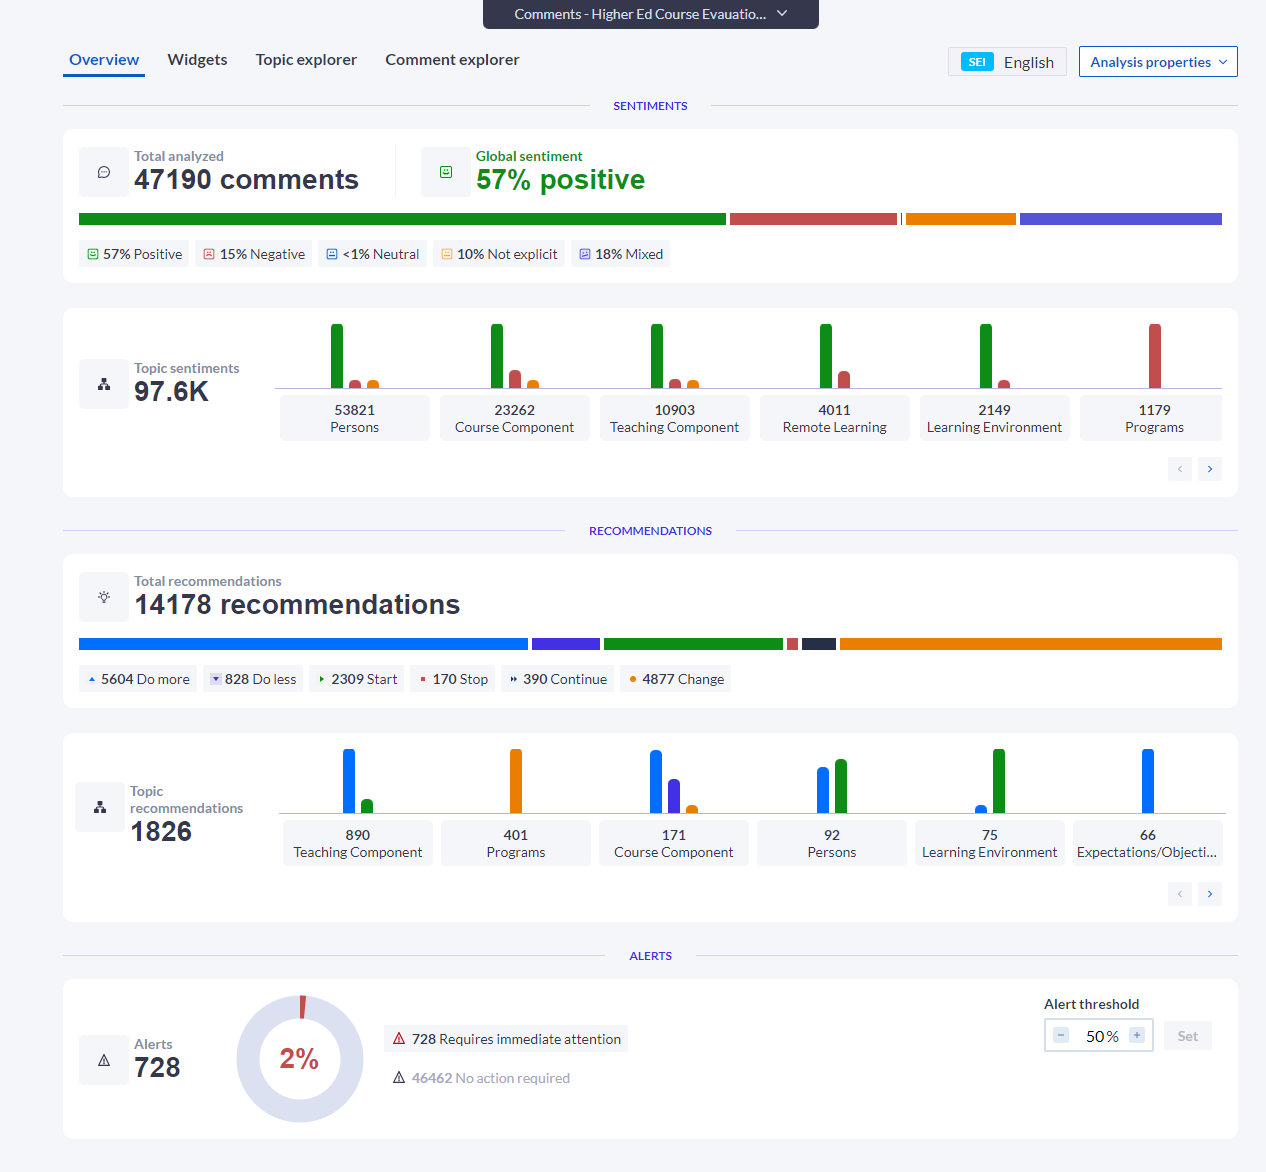 The MLY dashboard showing the results of an analysed file. There are four options for the user: overview, widgets, topic explorer and comment explorer. The overview screen is showing which gives high level statistics on the analysis. Including total analysed comments: 47190, with sentiment information: 97,600 sentiments identified, 57% positive, recommendations:14,178 total with some highlighted topics - teaching component, programs, persons, learning enrolment and expectations/objectives and finally alerts: 728 comments requiring immediate attention, 46462 with no action required, there is an adjustable alerts threshold box which is set to 50%. 